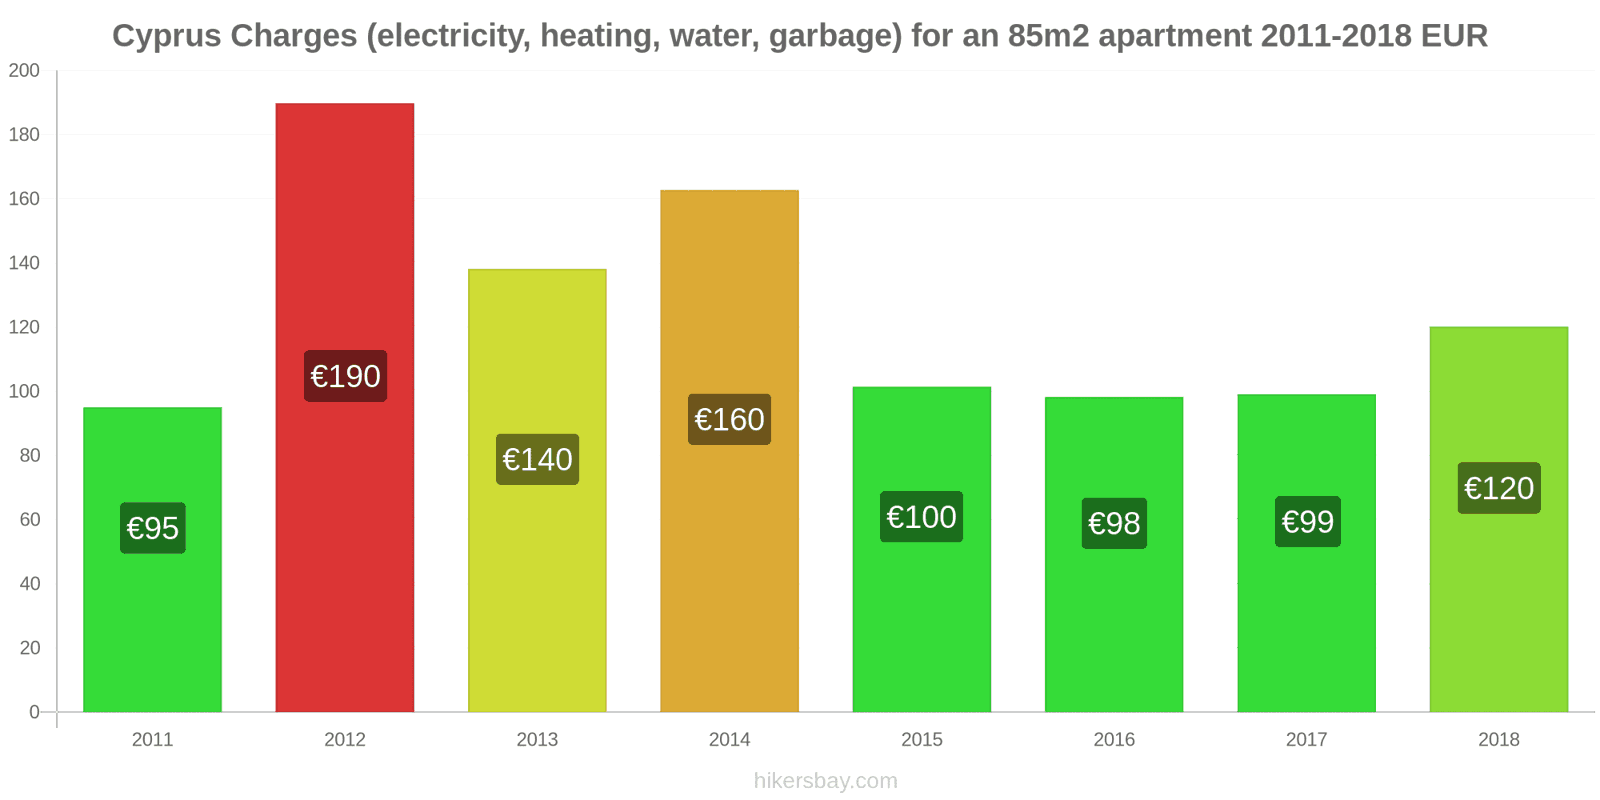 Cyprus price changes Utilities (electricity, heating, water, garbage) for an 85m2 apartment hikersbay.com